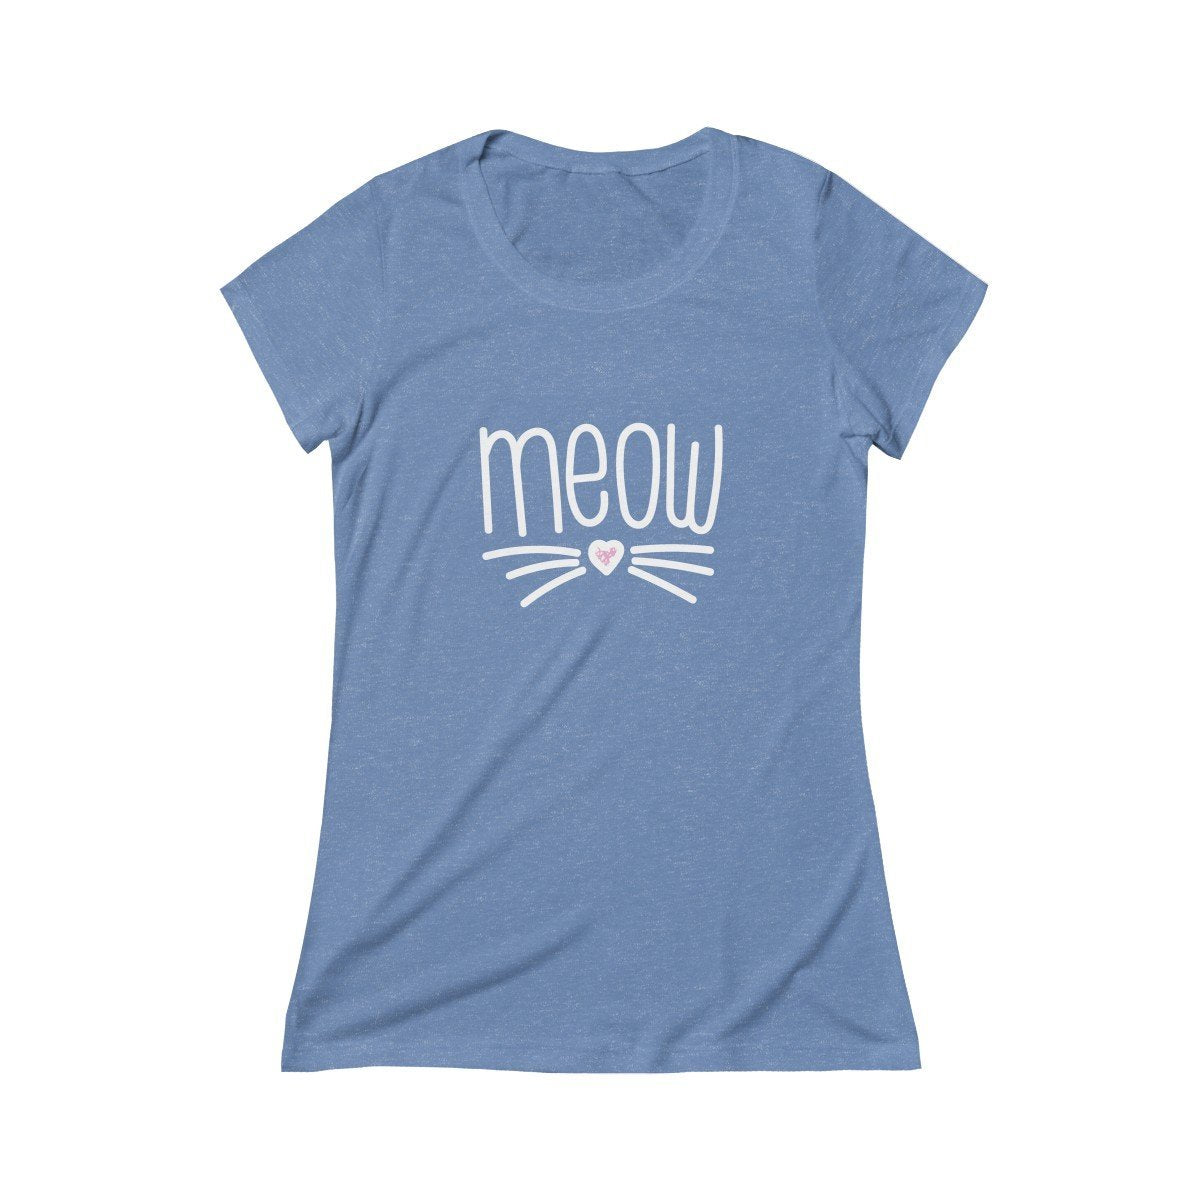 Meow Clothing for Women, Cute Shirt with the Word Meow and a Cat Face Printed On the Front